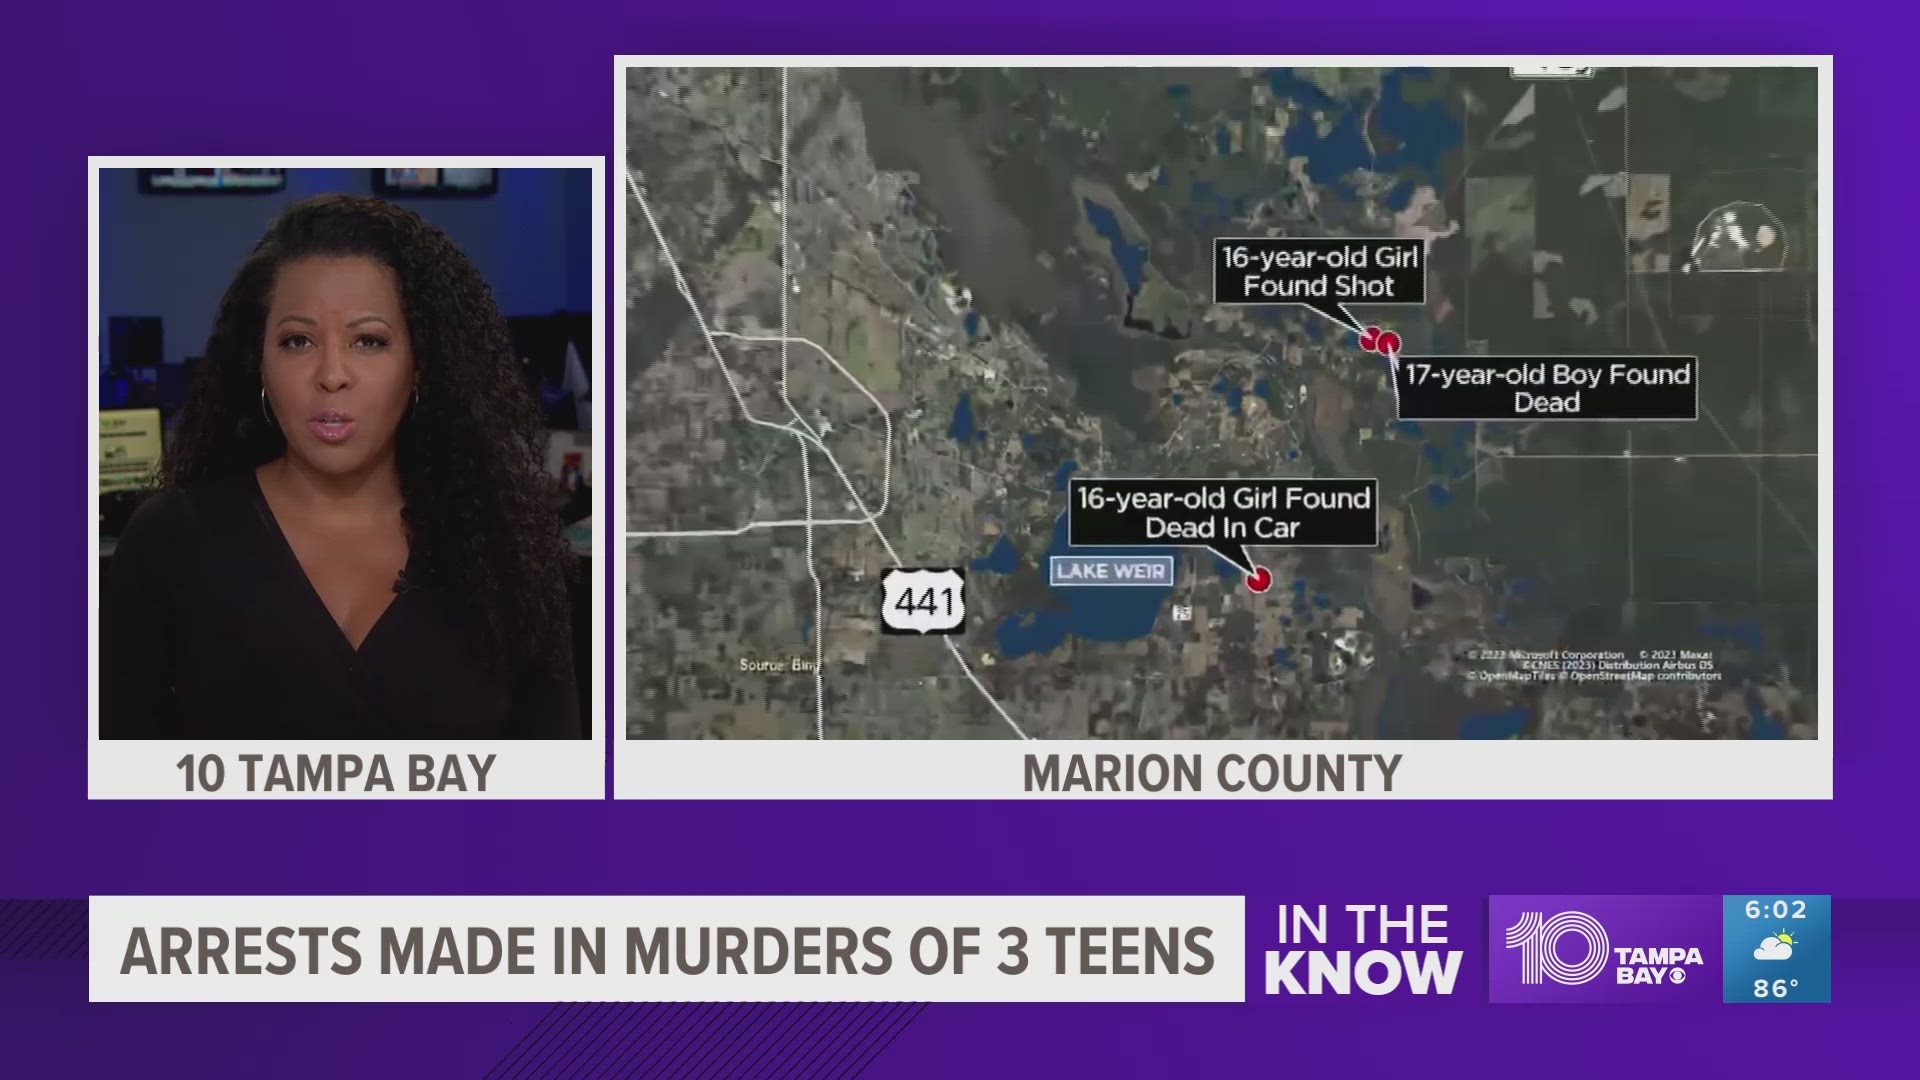 Two juveniles, including the 12-year-old, were arrested in connection to the murders. Deputies are still searching for the third teen.